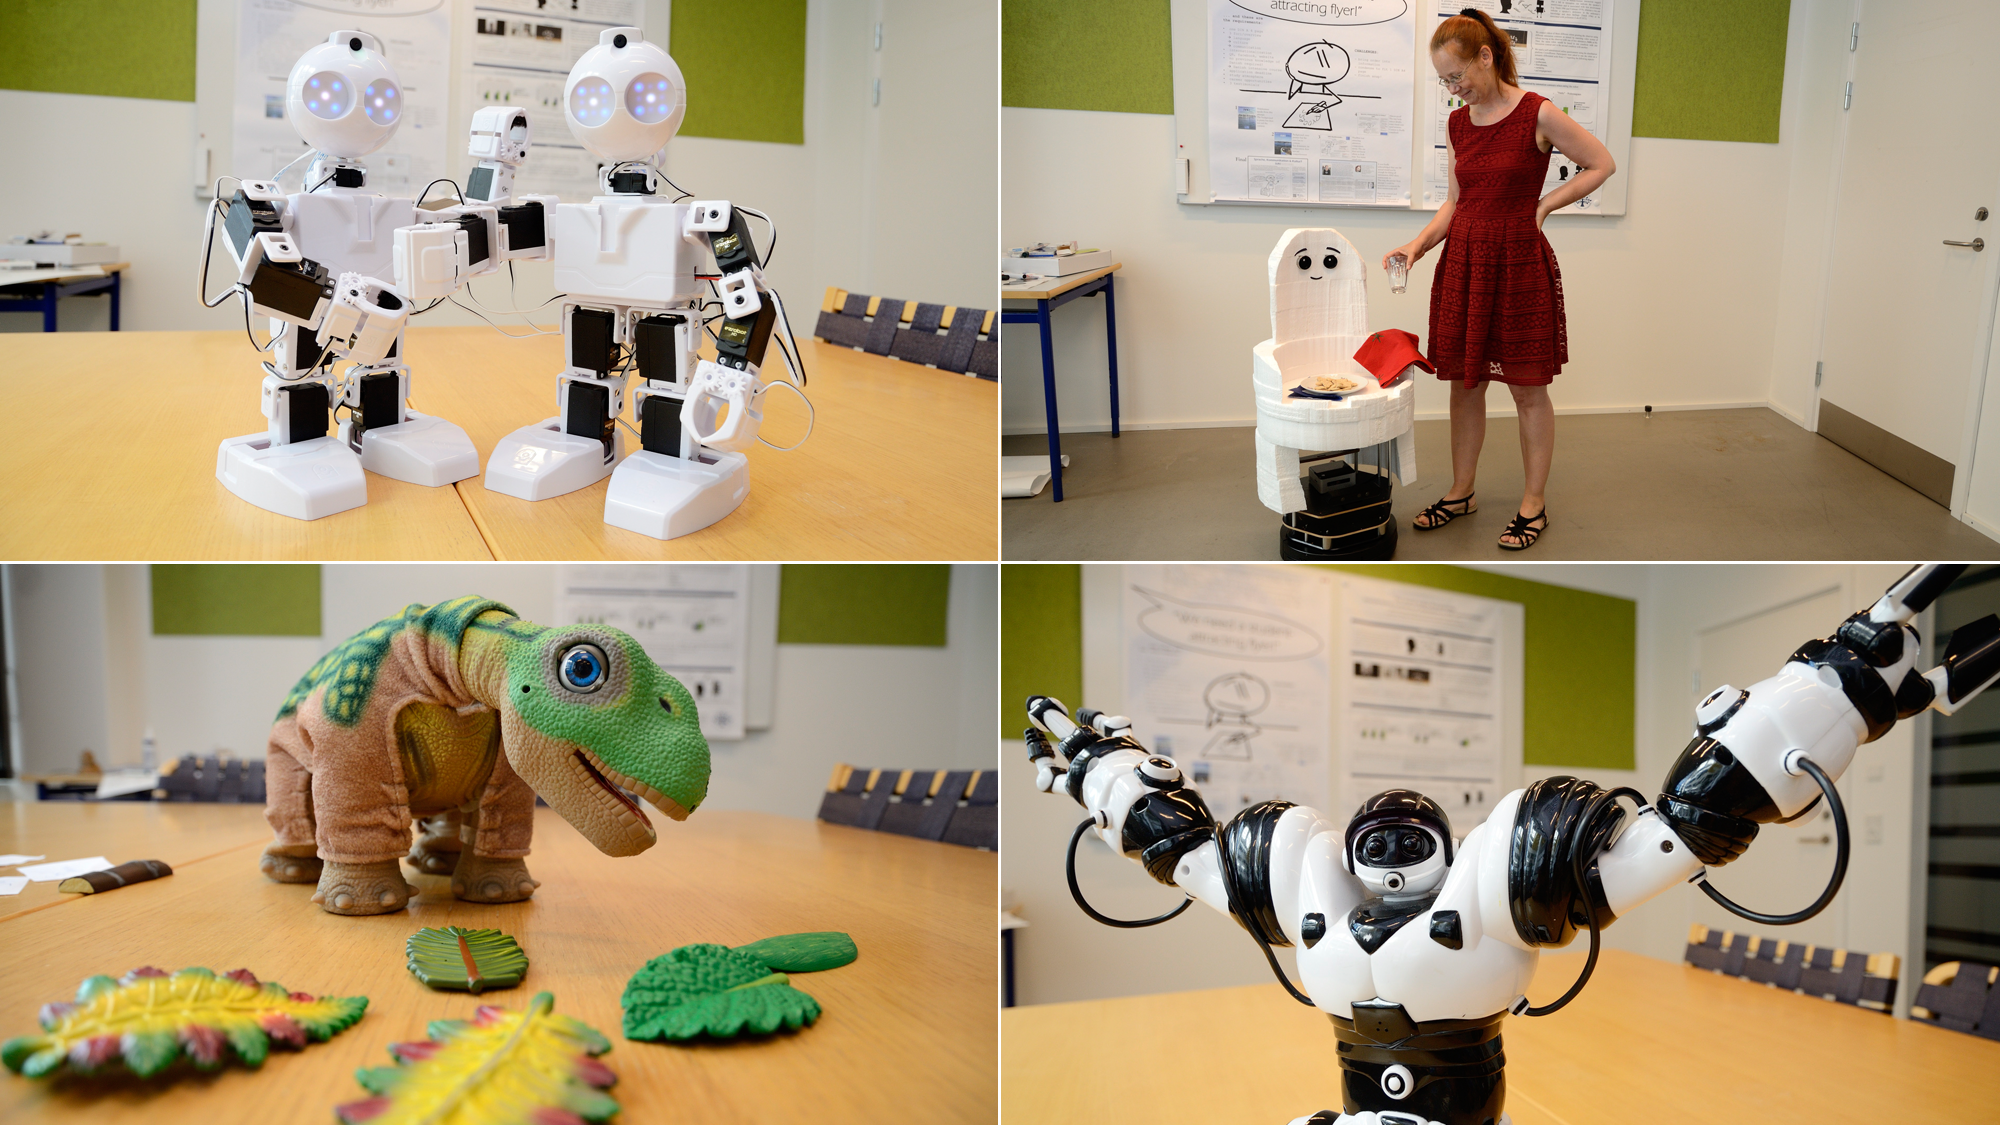 The HRI-lab at the SDU Sønderborg offers a wide range of robots for experiments.